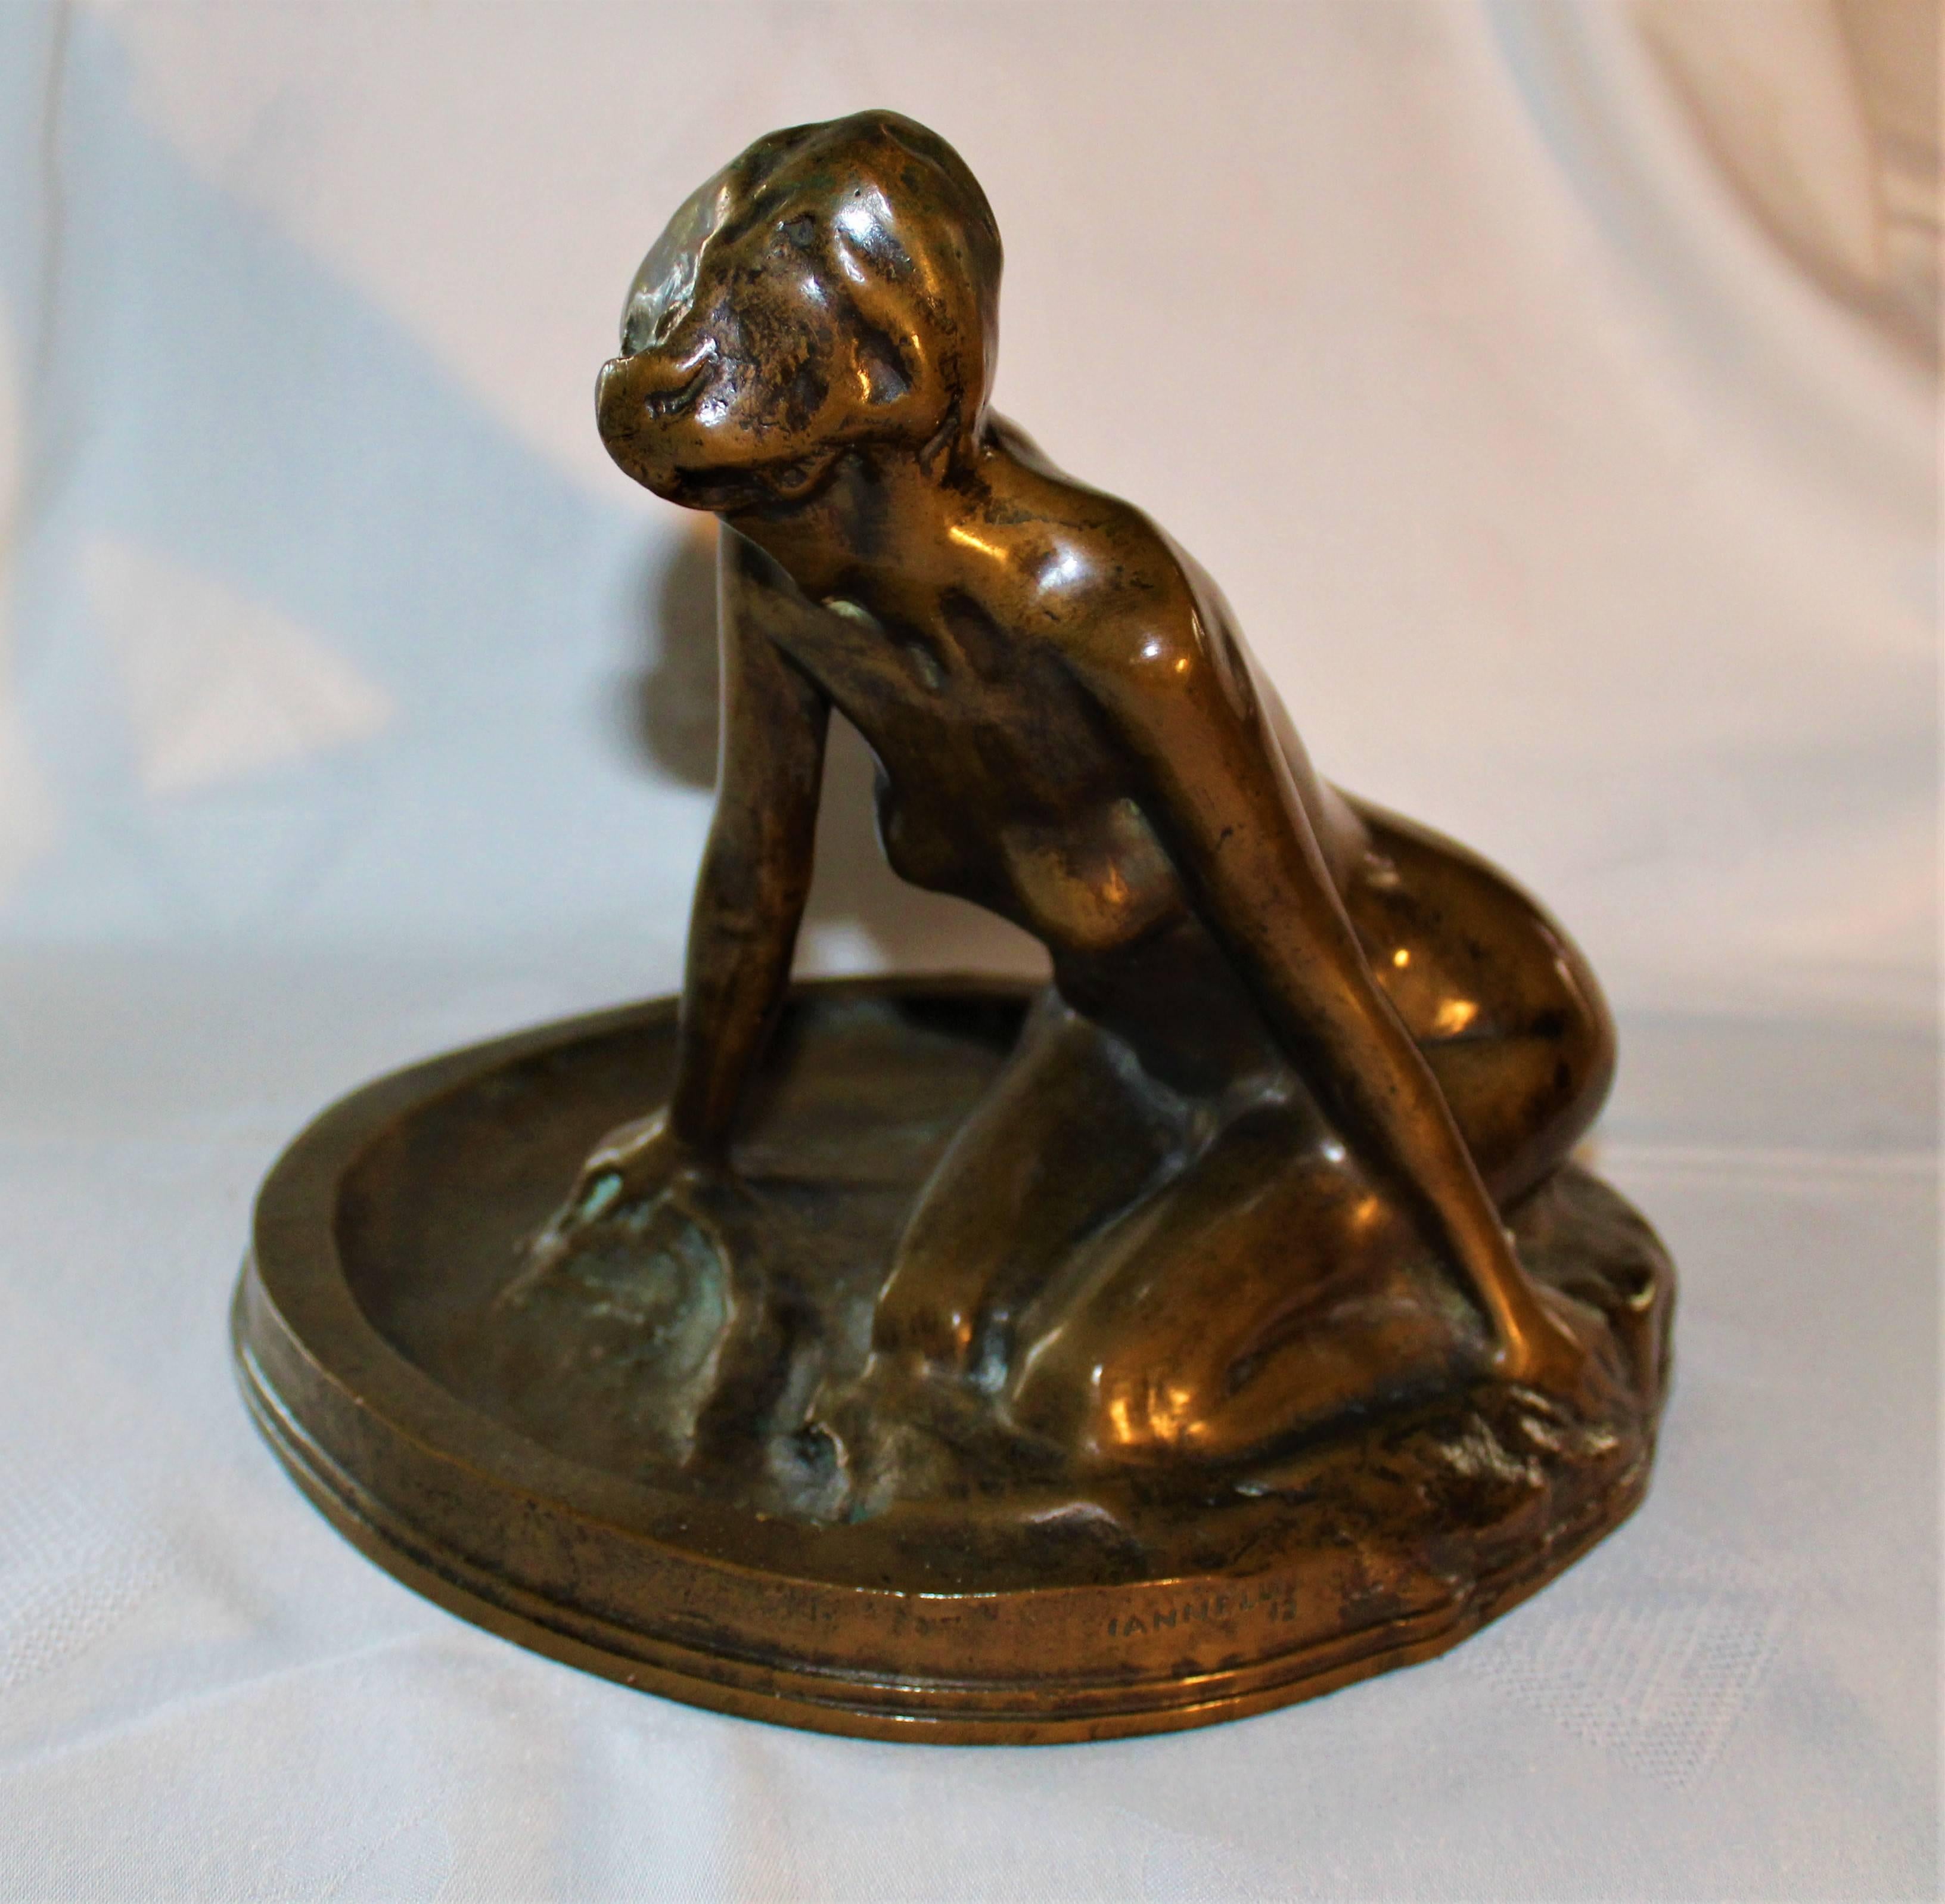 Signed Alfonso Iannelli (1888-1965) modern bronze nude figural sculpture stamped with Boston foundry mark 1912.

Alfonso Iannelli (February 17, 1888-March 23, 1965) was an Italian-American sculptor, artist, and industrial designer.
Based in